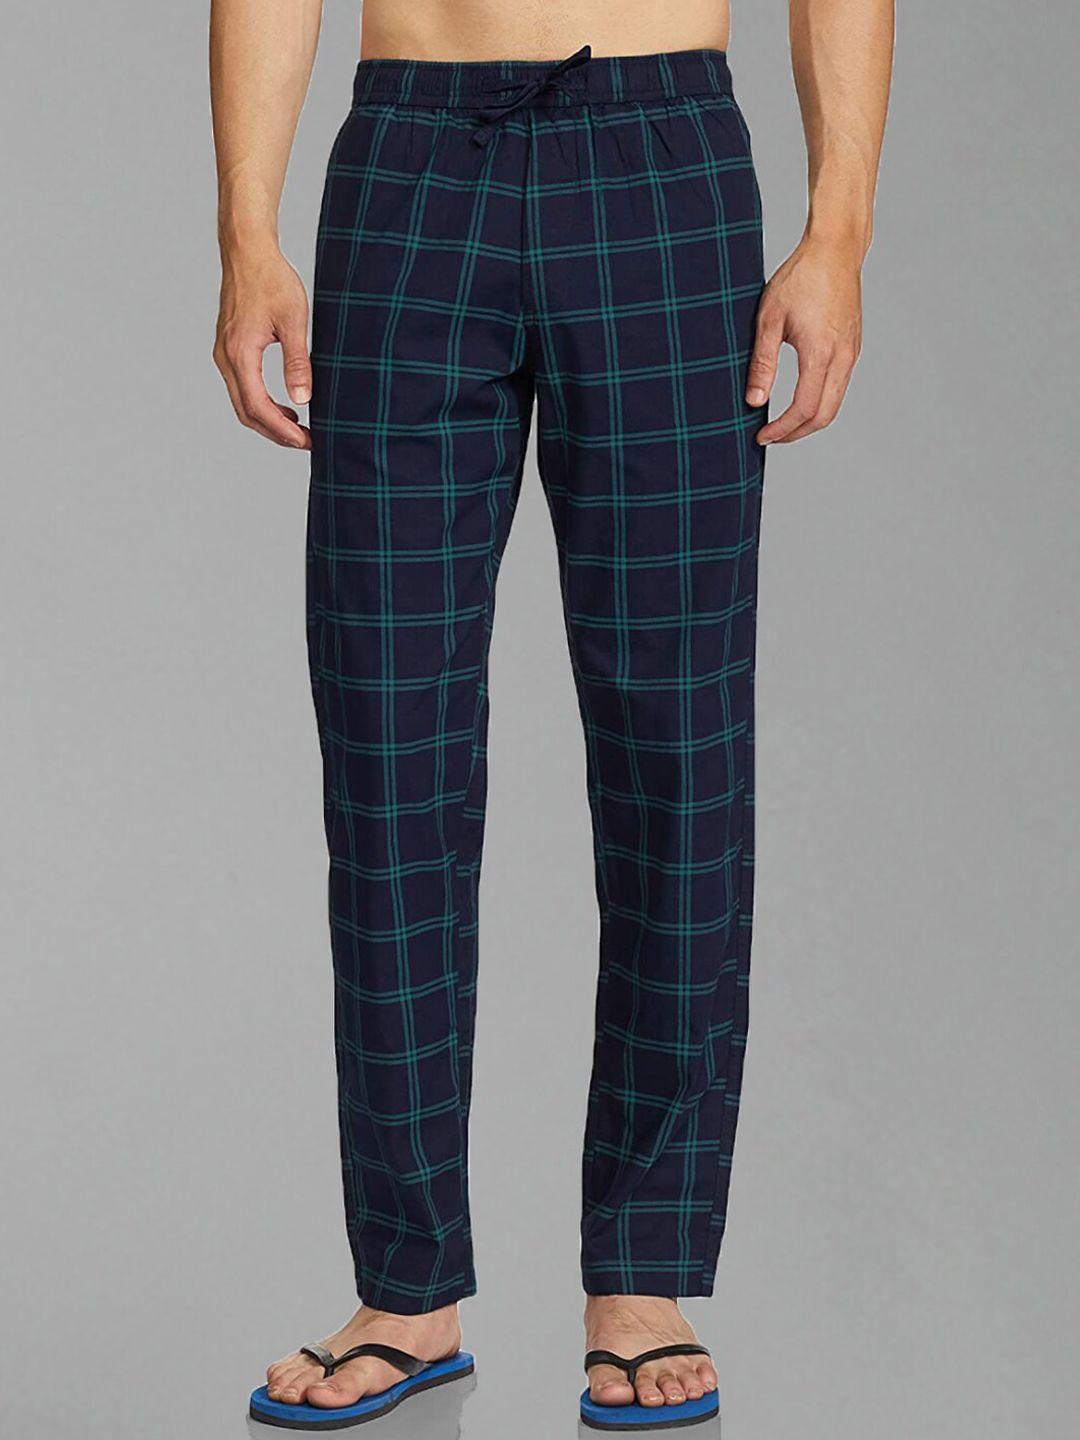 dream of glory inc. men navy blue checked pure cotton lounge pant